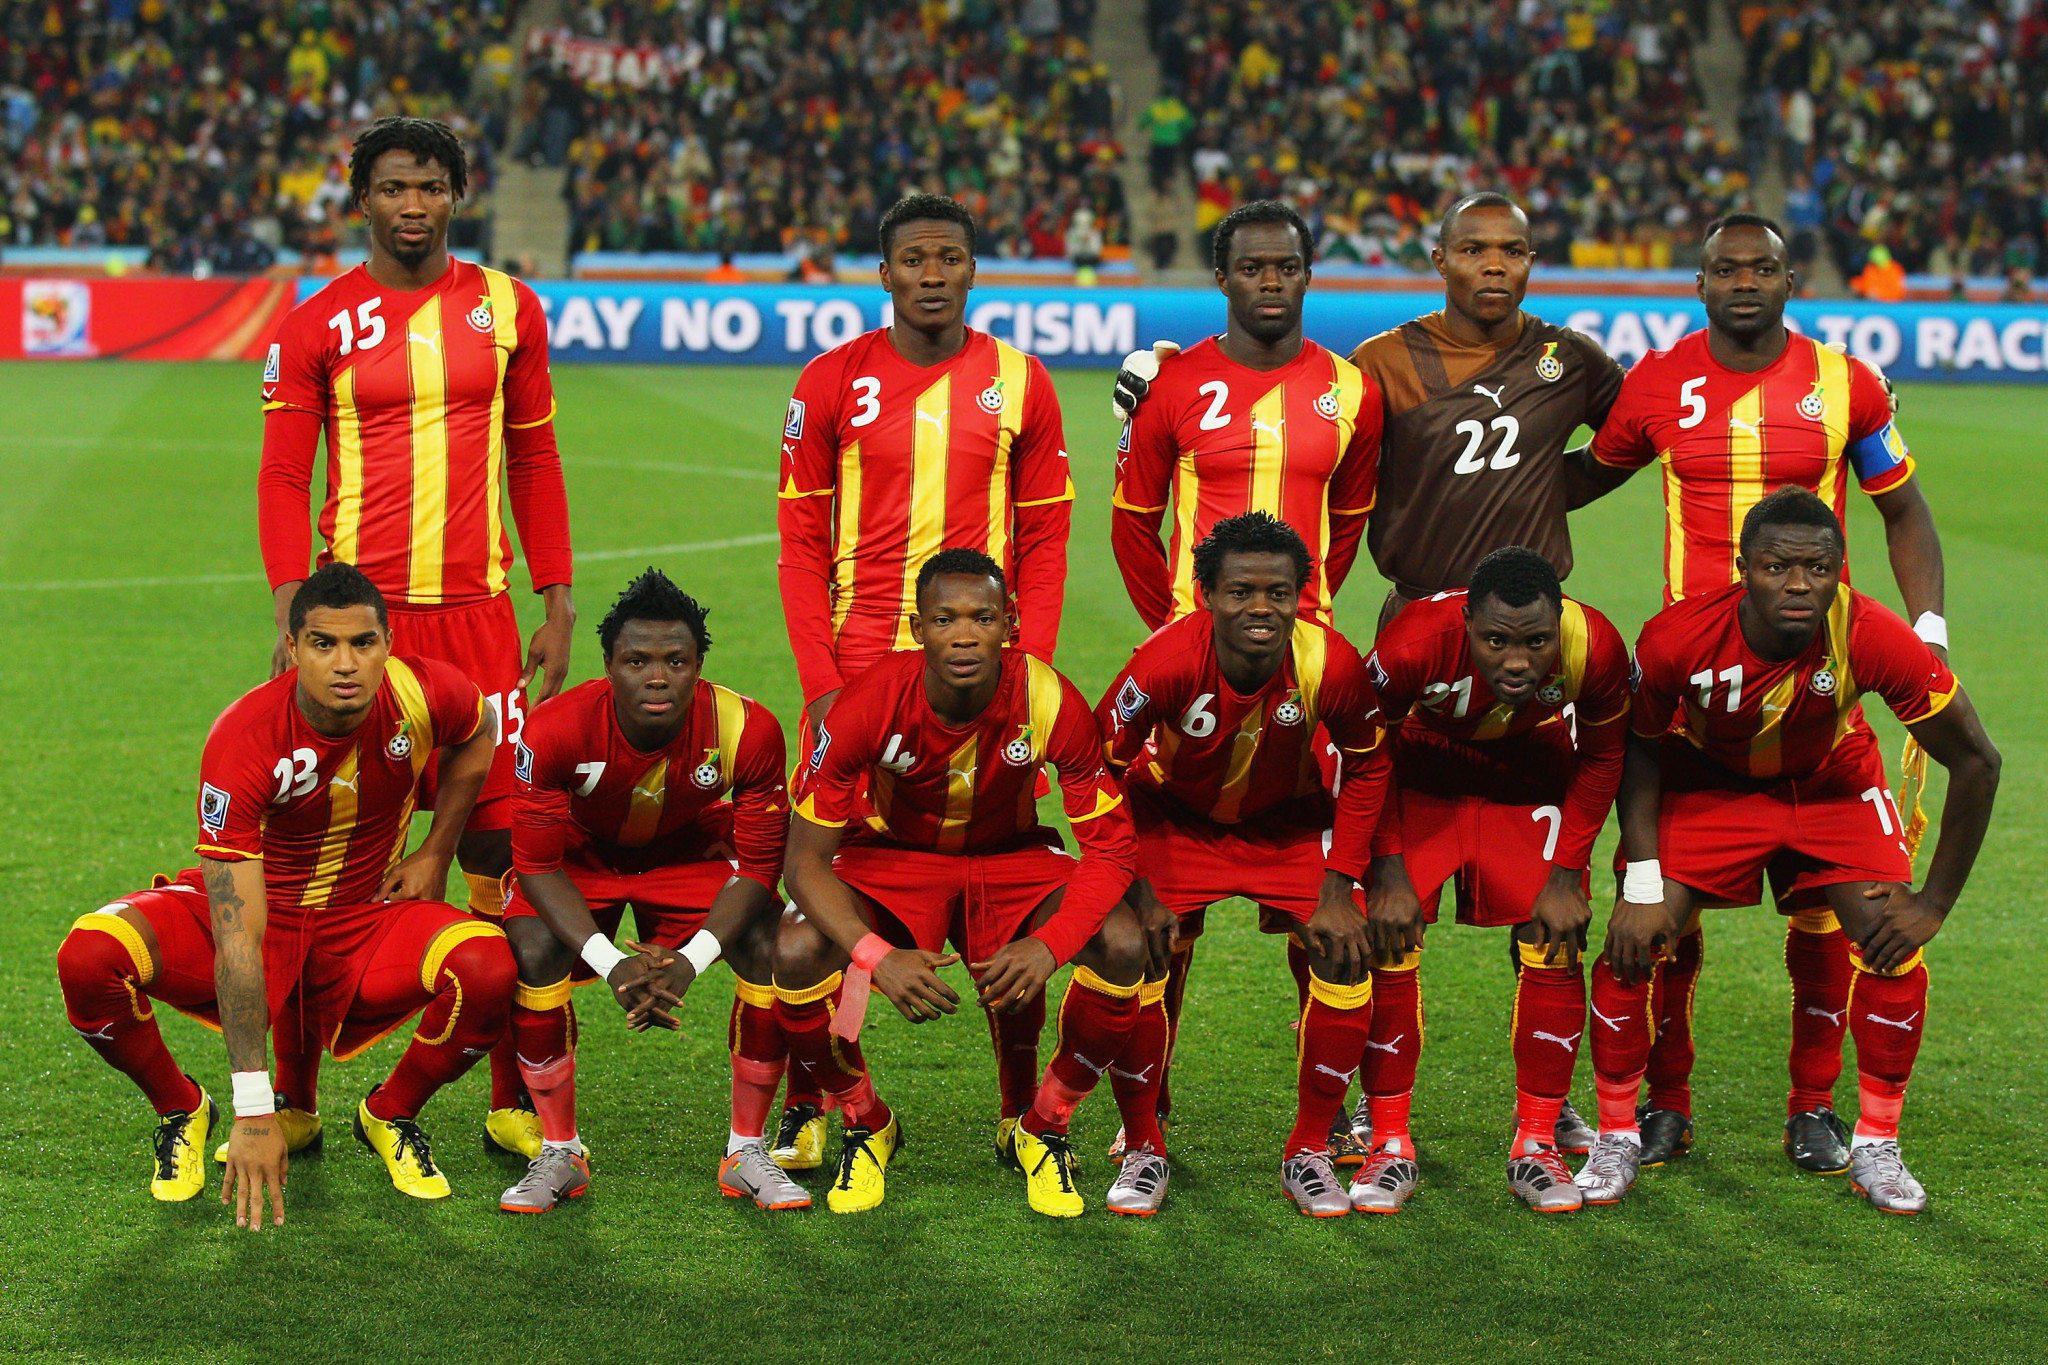 Ghana reached the quarter-finals in 2010, tied for the furthest an African team has ever gone ©Getty Images